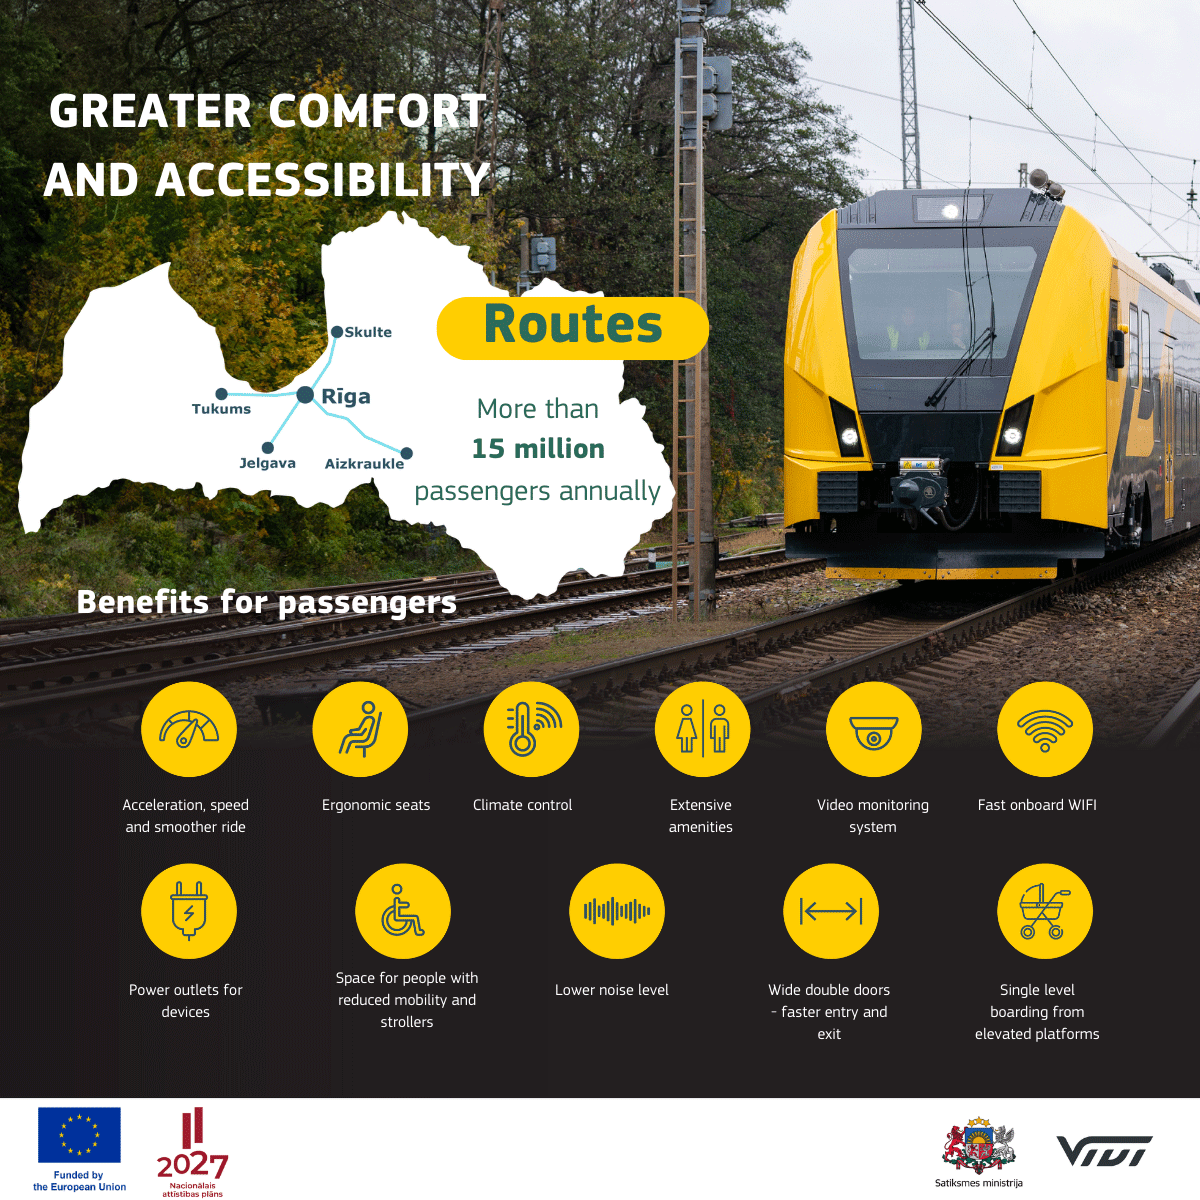 23 new electric trains to improve transport in Latvia thanks to Cohesion Policy funds